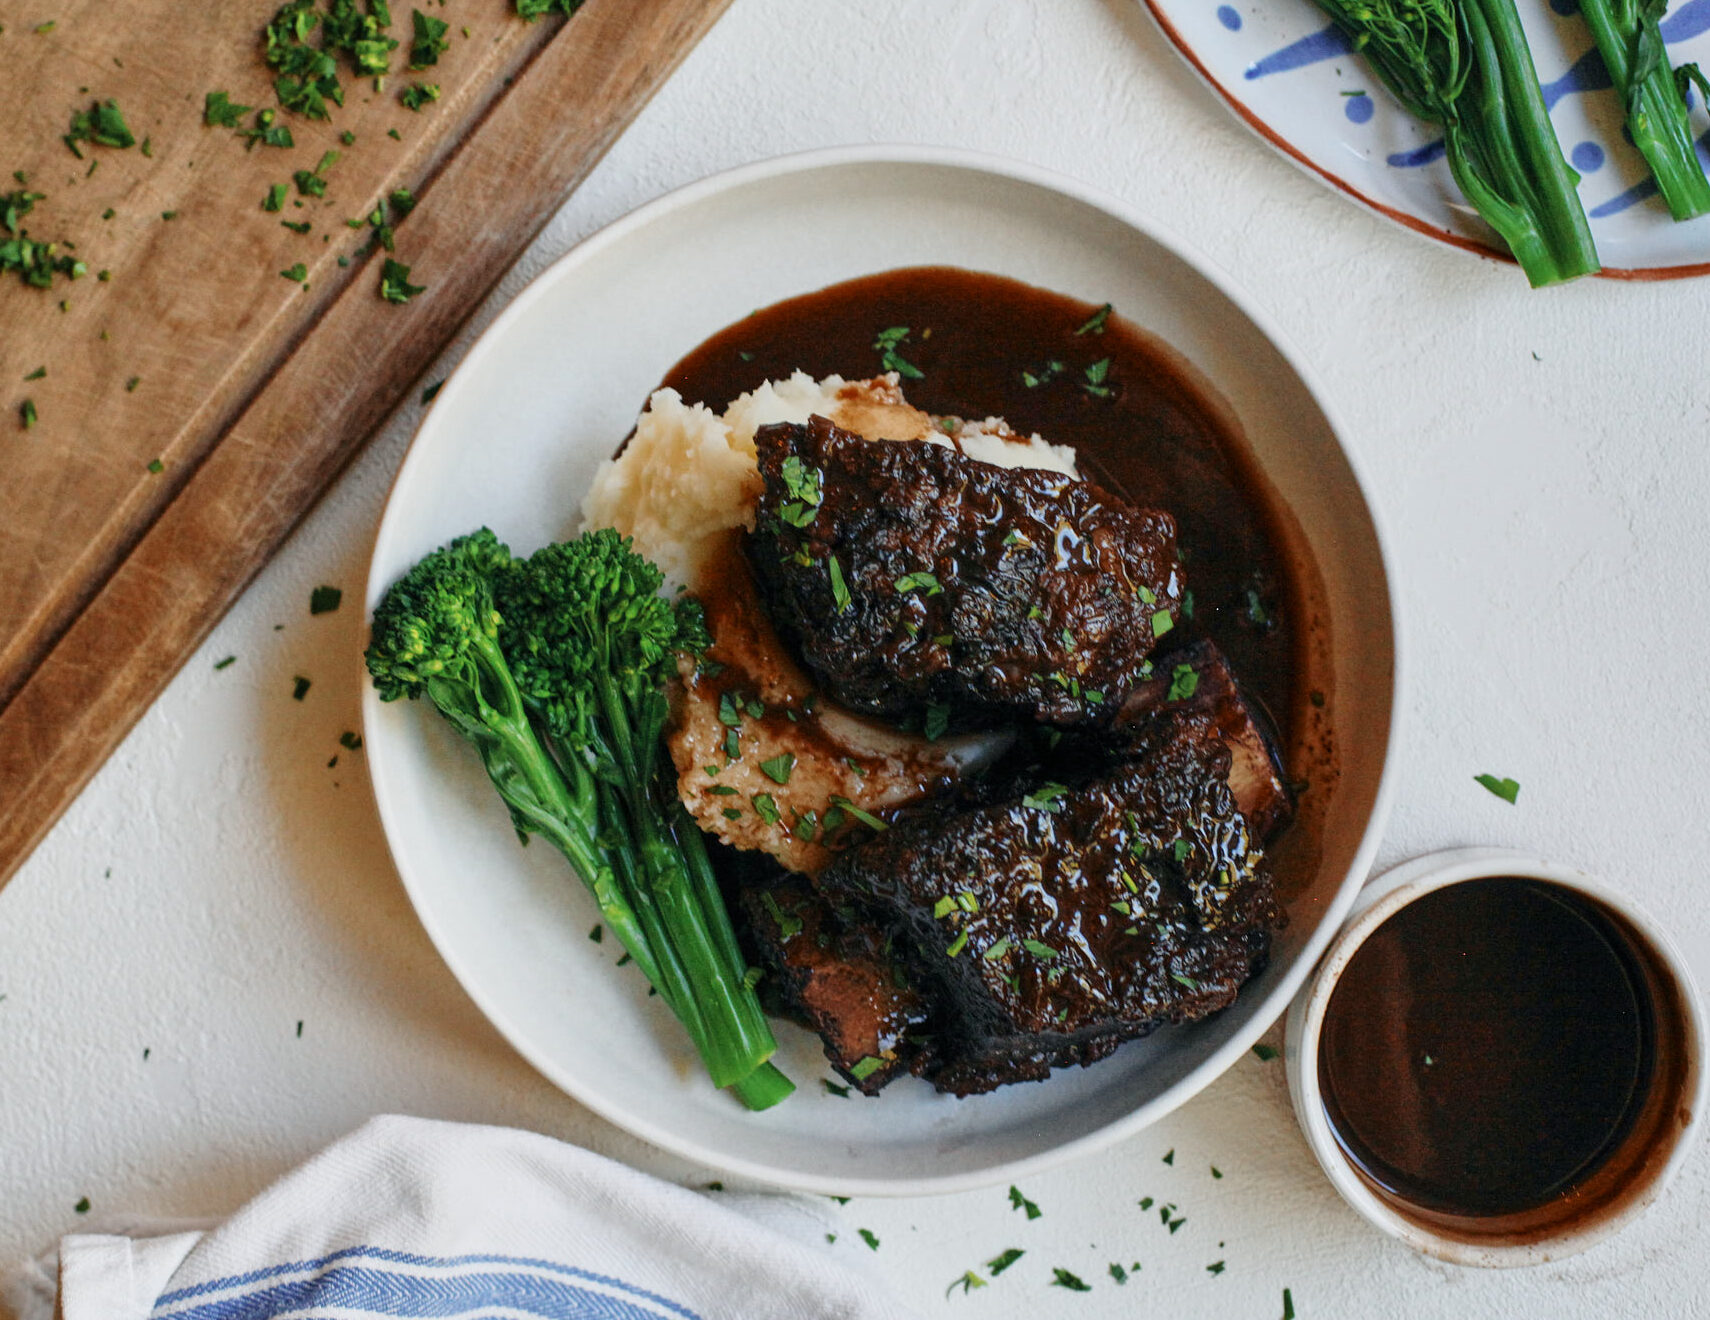 red wine braised short ribs over mashed potatoes and broccolini with a red wine sauce poured over top